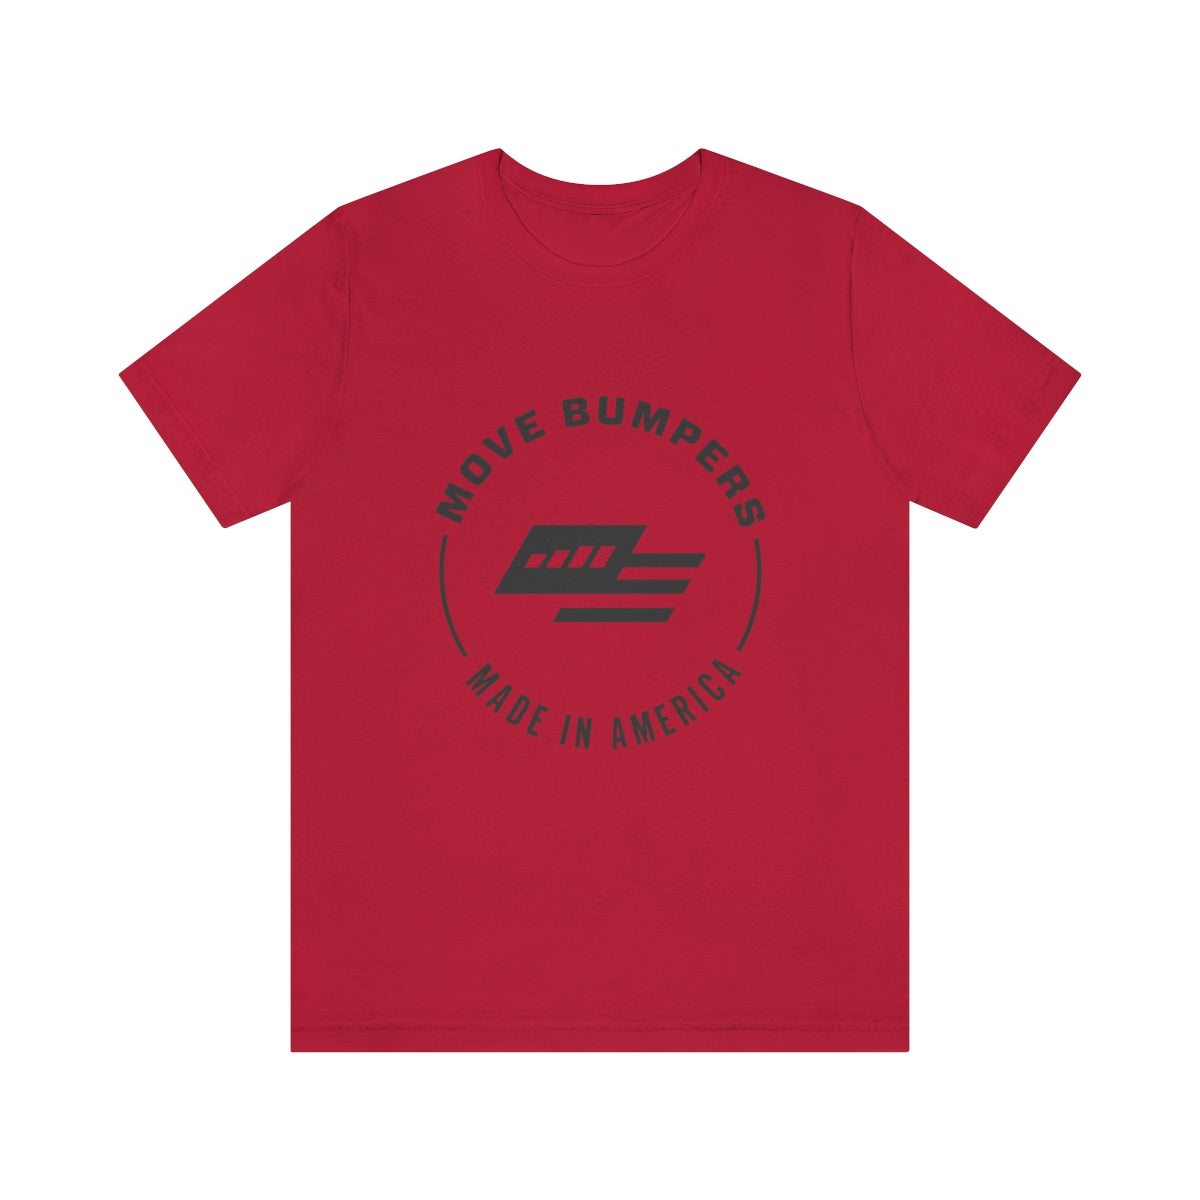 MOVE Bumpers - T-shirt Red